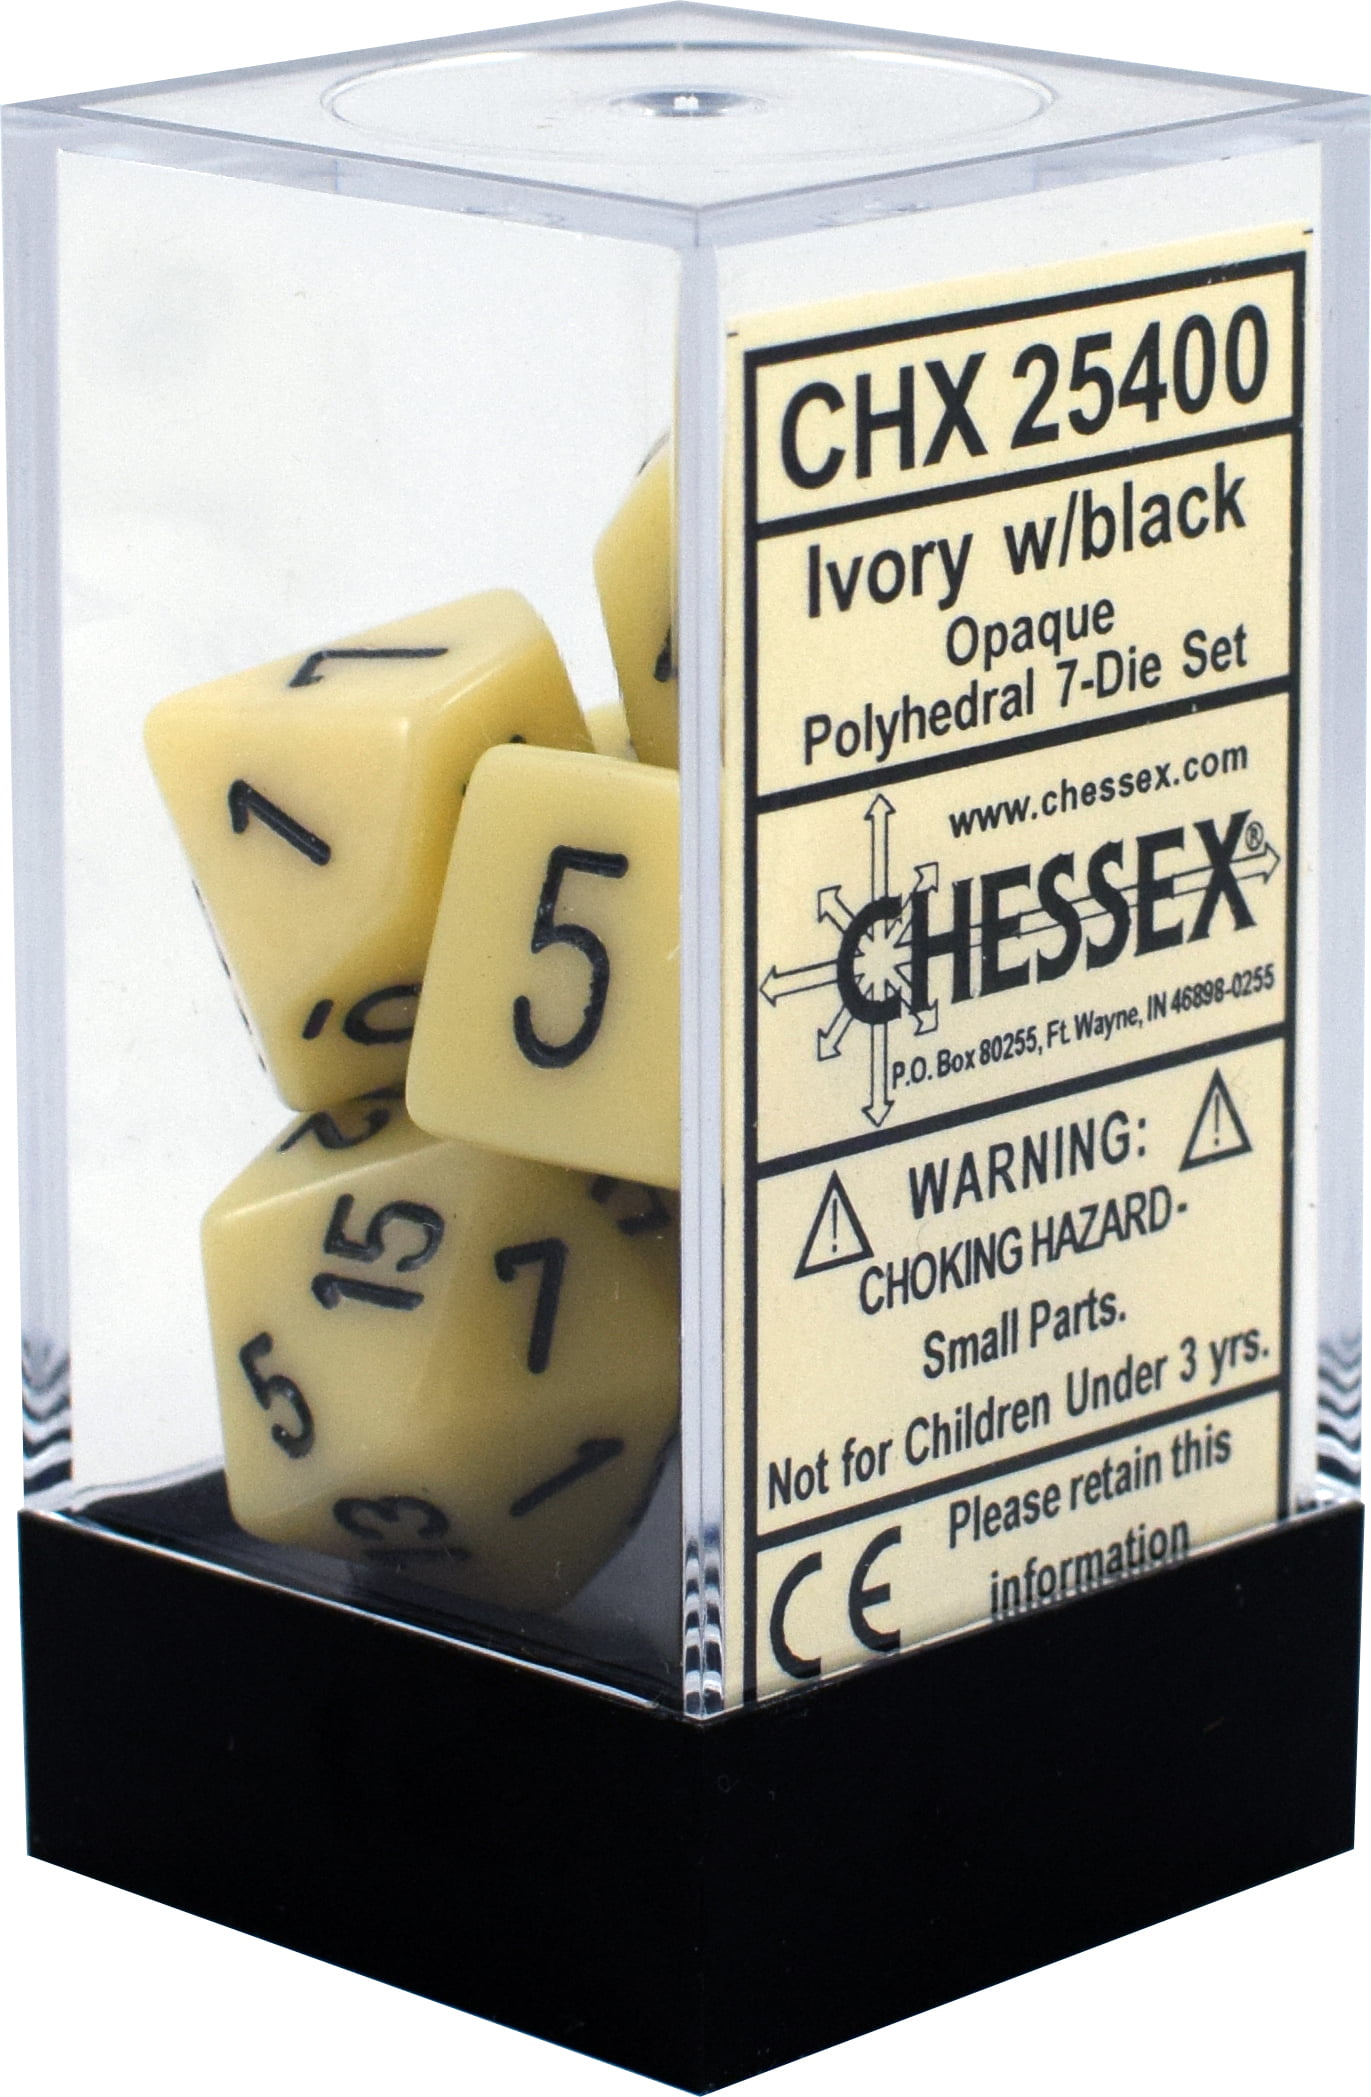 Chessex Opaque Ivory W/ Black Polyhedral 7 Dice Set CHX25400 for sale online